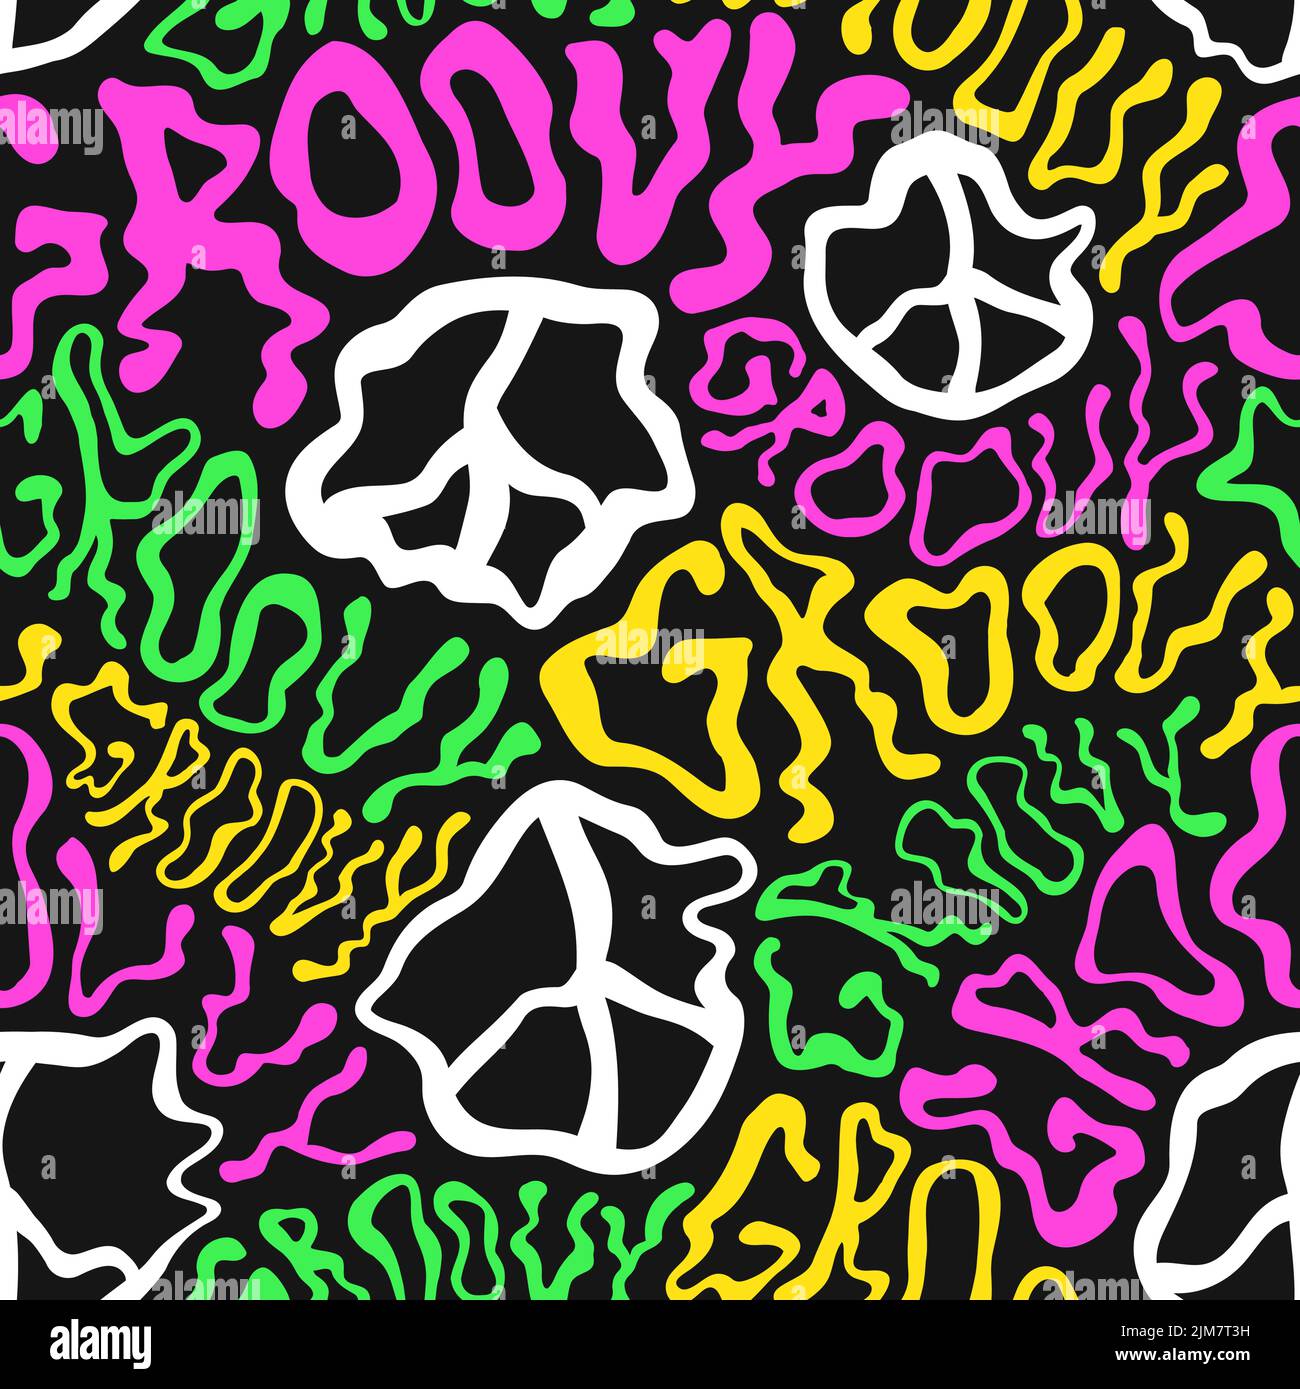 Deformed wavy groovy word and peace sign seamless pattern wallpaper.Vector graphic character illustration.Groovy,trippy lettering,lsd,acid,60s,70s,psychedelic seamless pattern wallpaper print concept Stock Vector